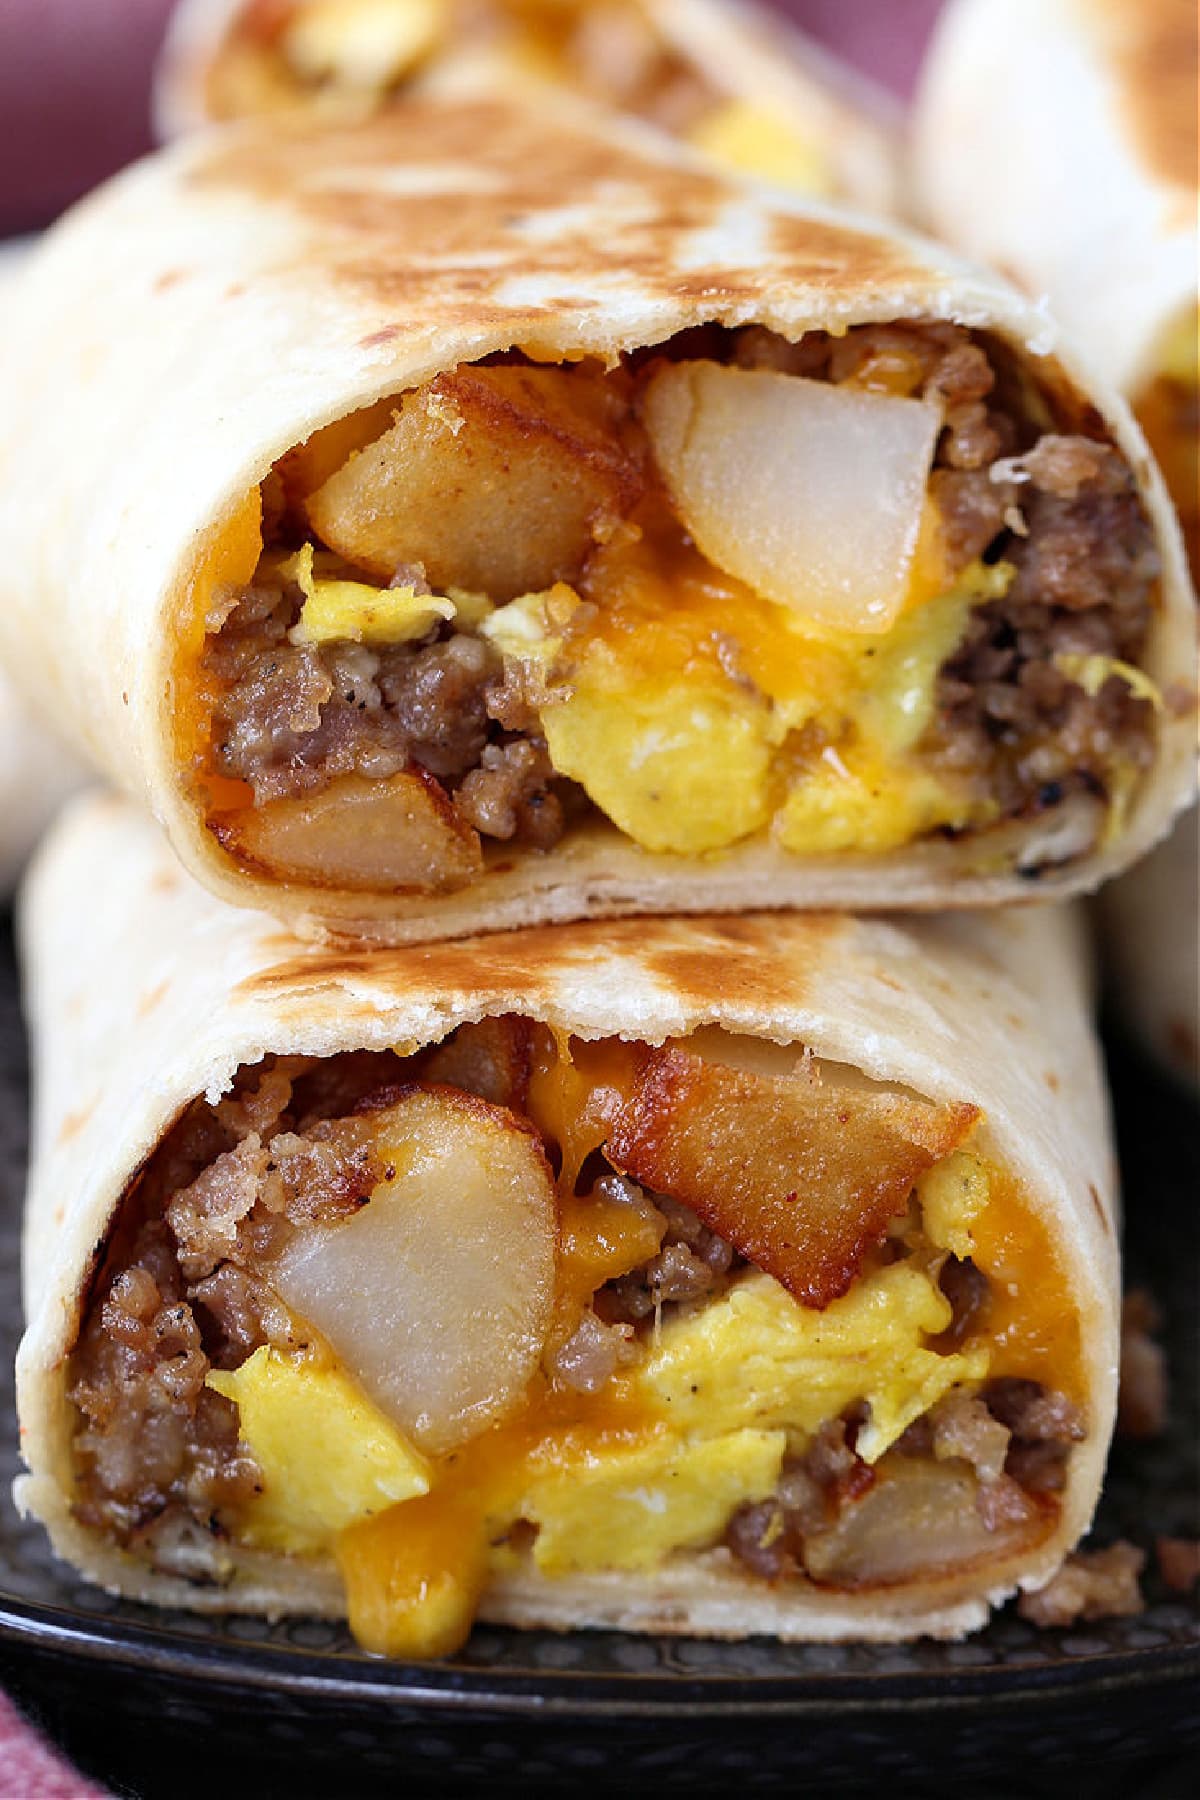 Breakfast Burritos with cheese, sausage, potatoes and egg cut in half on a plate